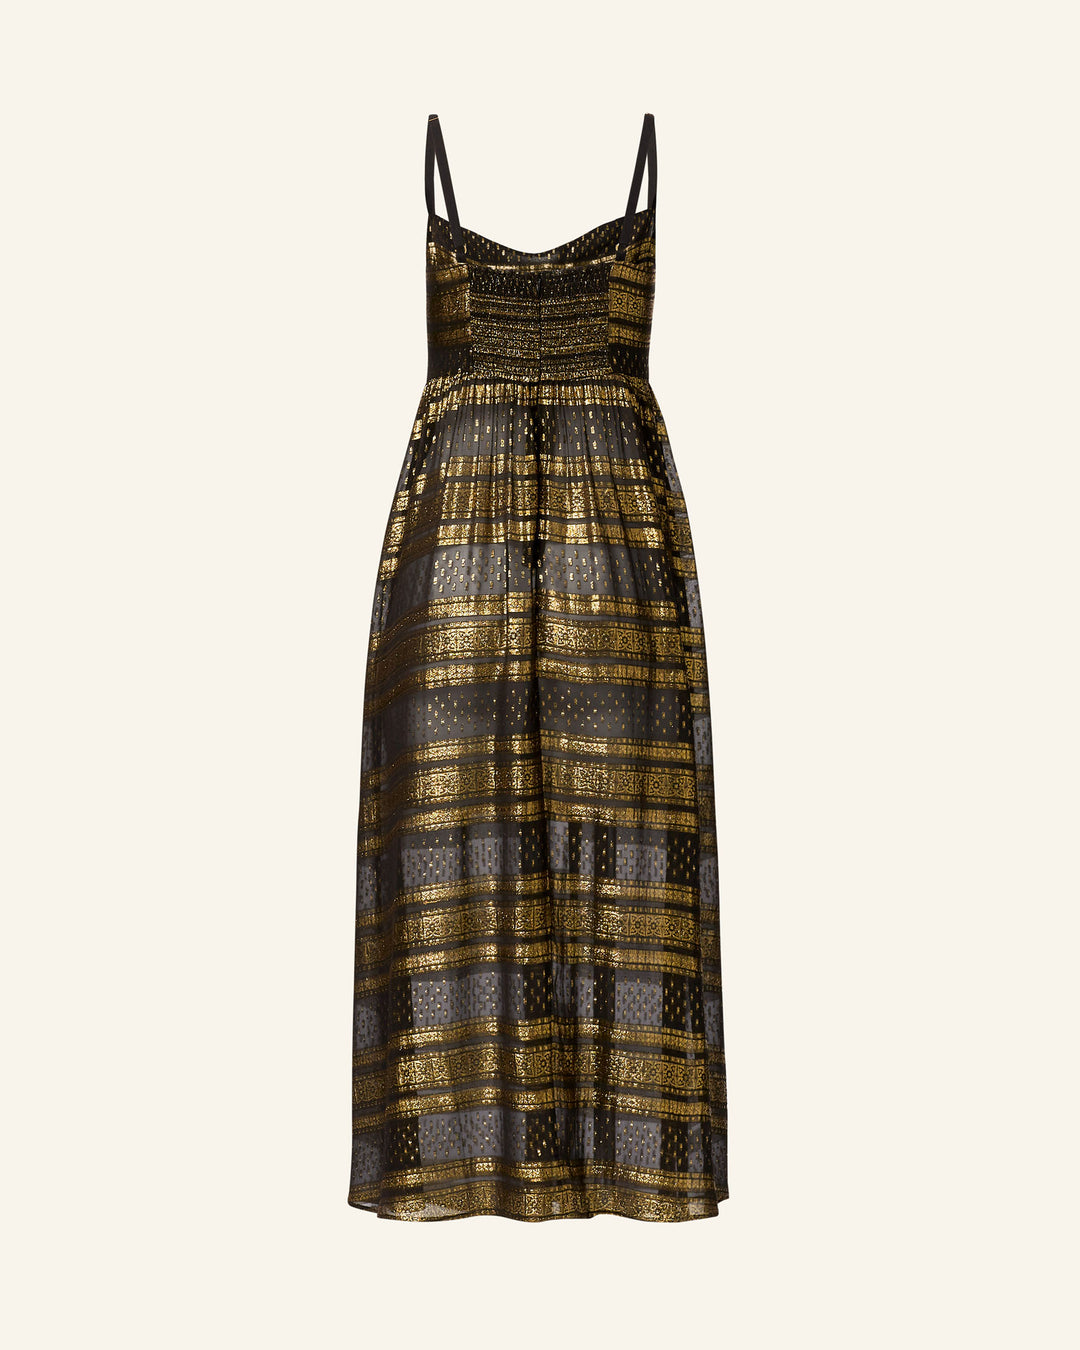 Autumn Gilded Lily Dress